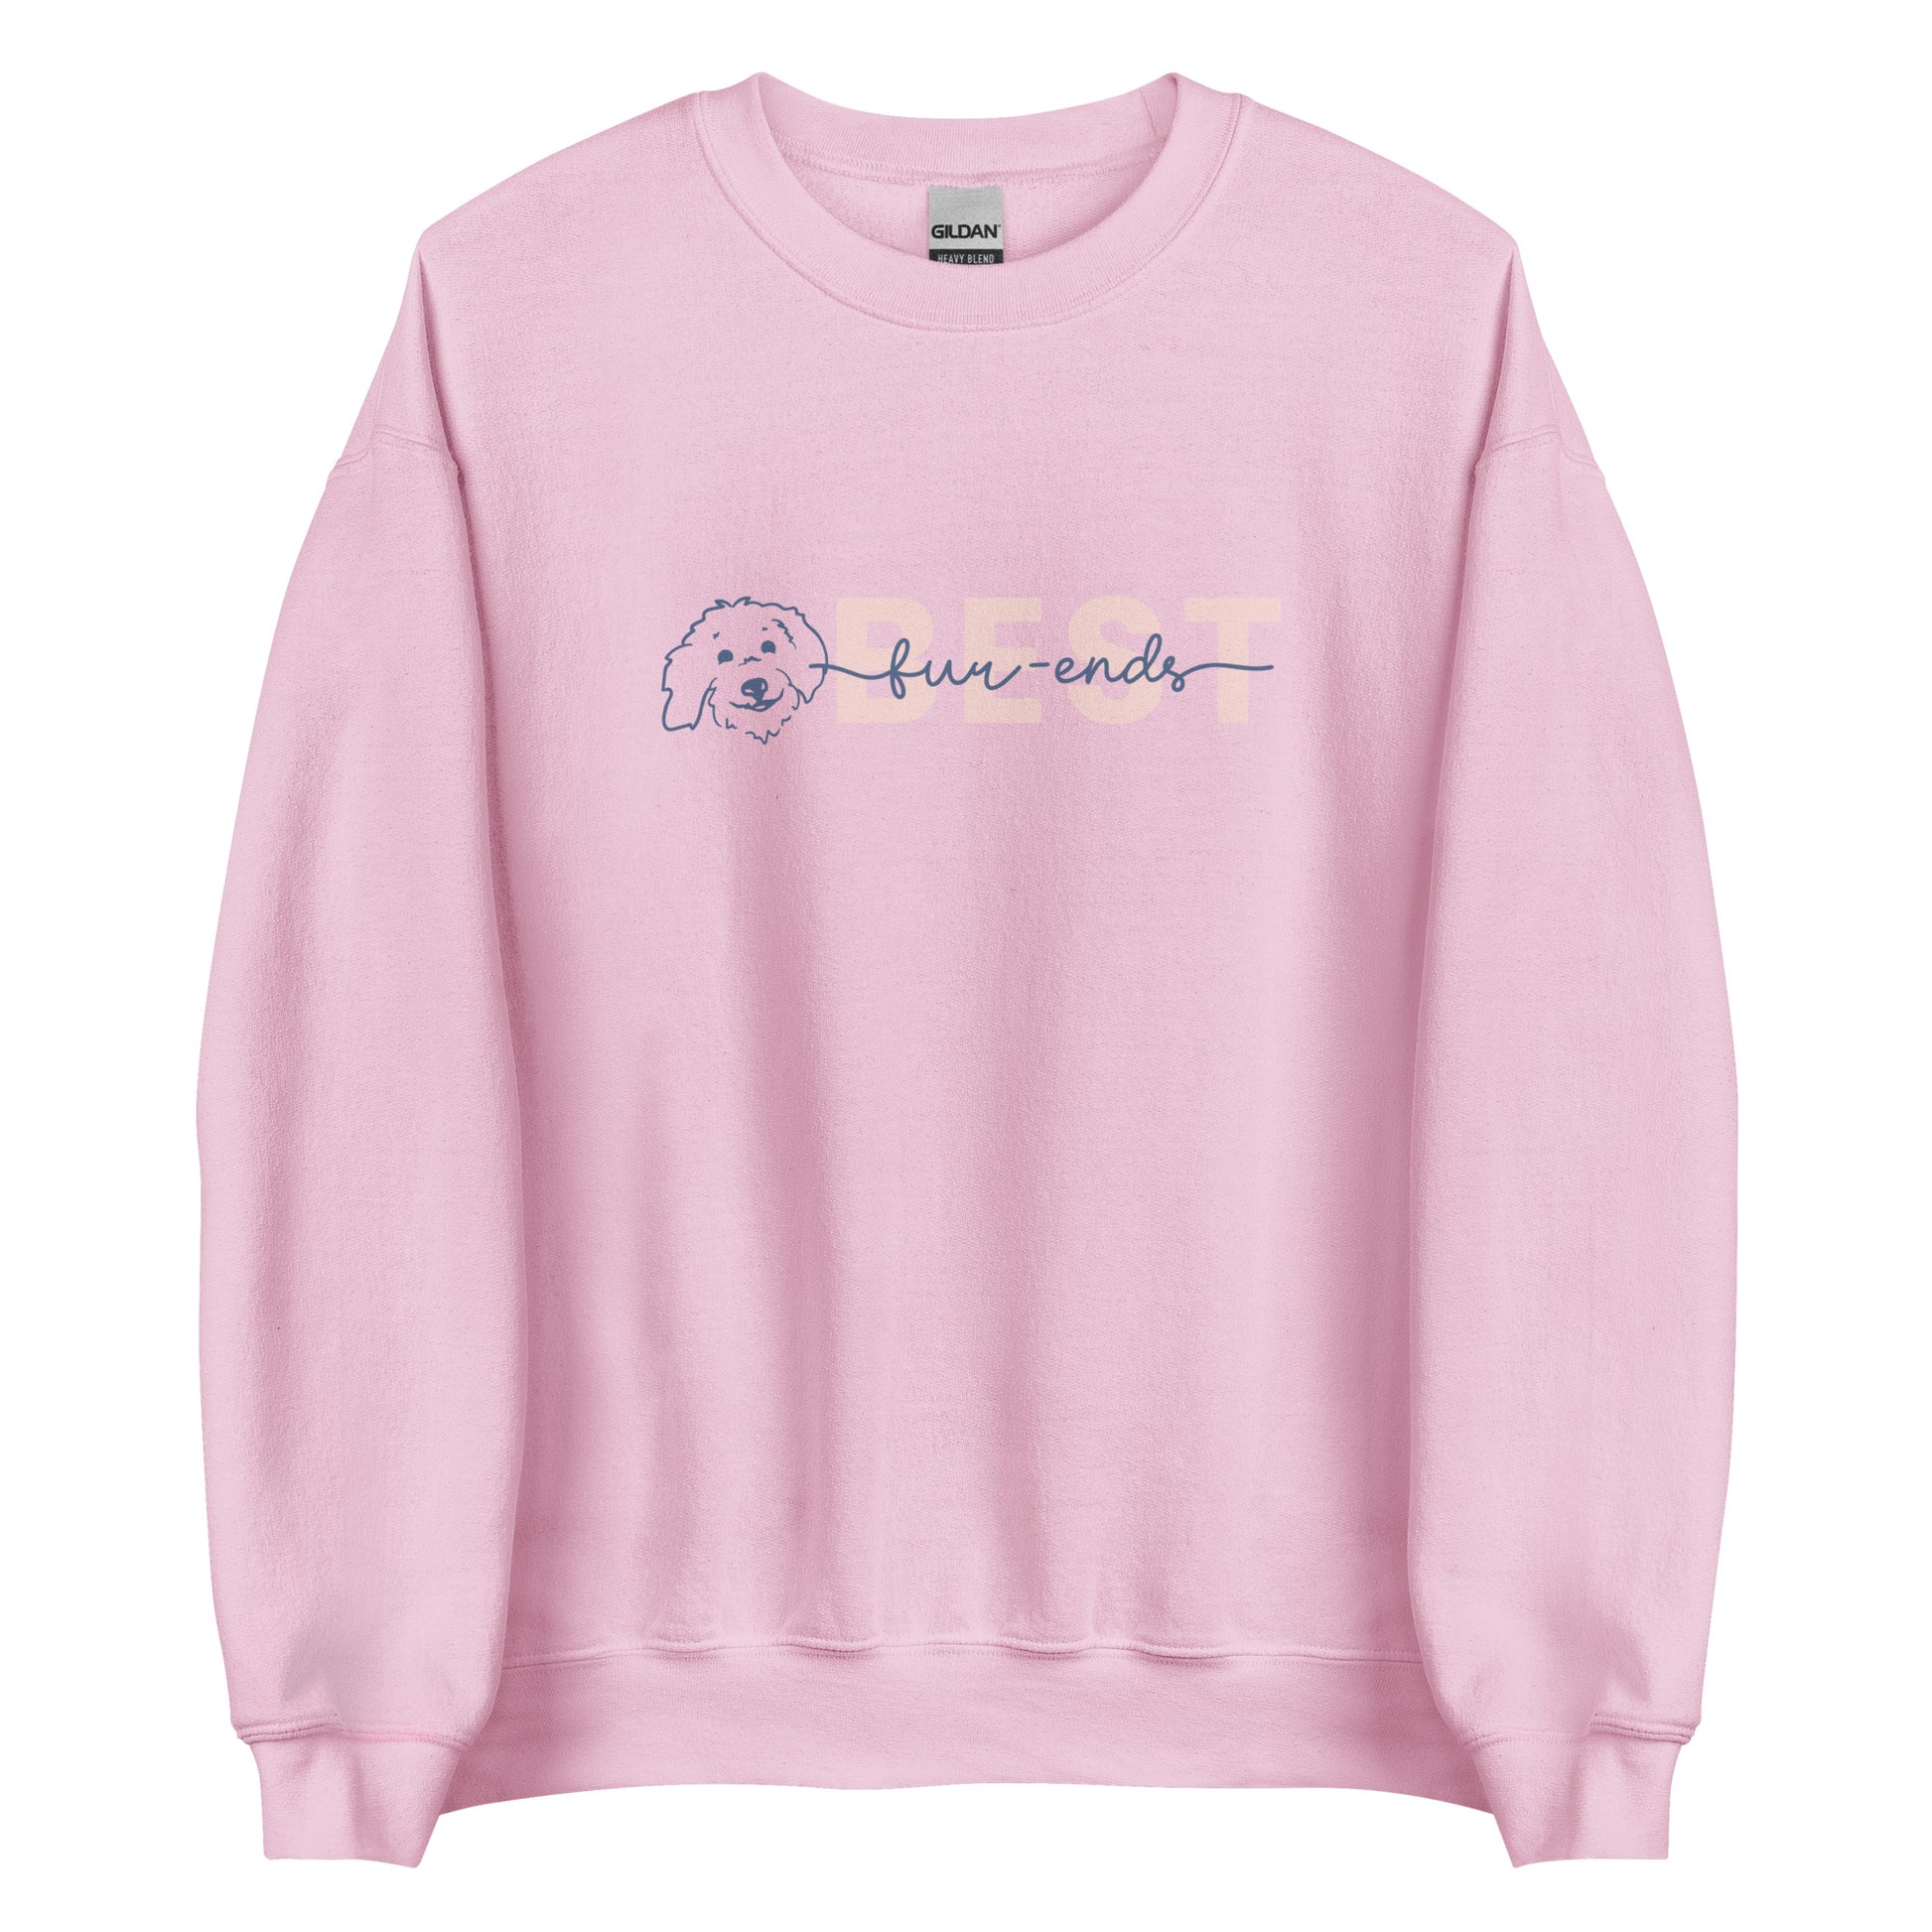 Goldendoodle crew neck sweatshirt with Goldendoodle face and words "Best fur-Ends" in light pink color